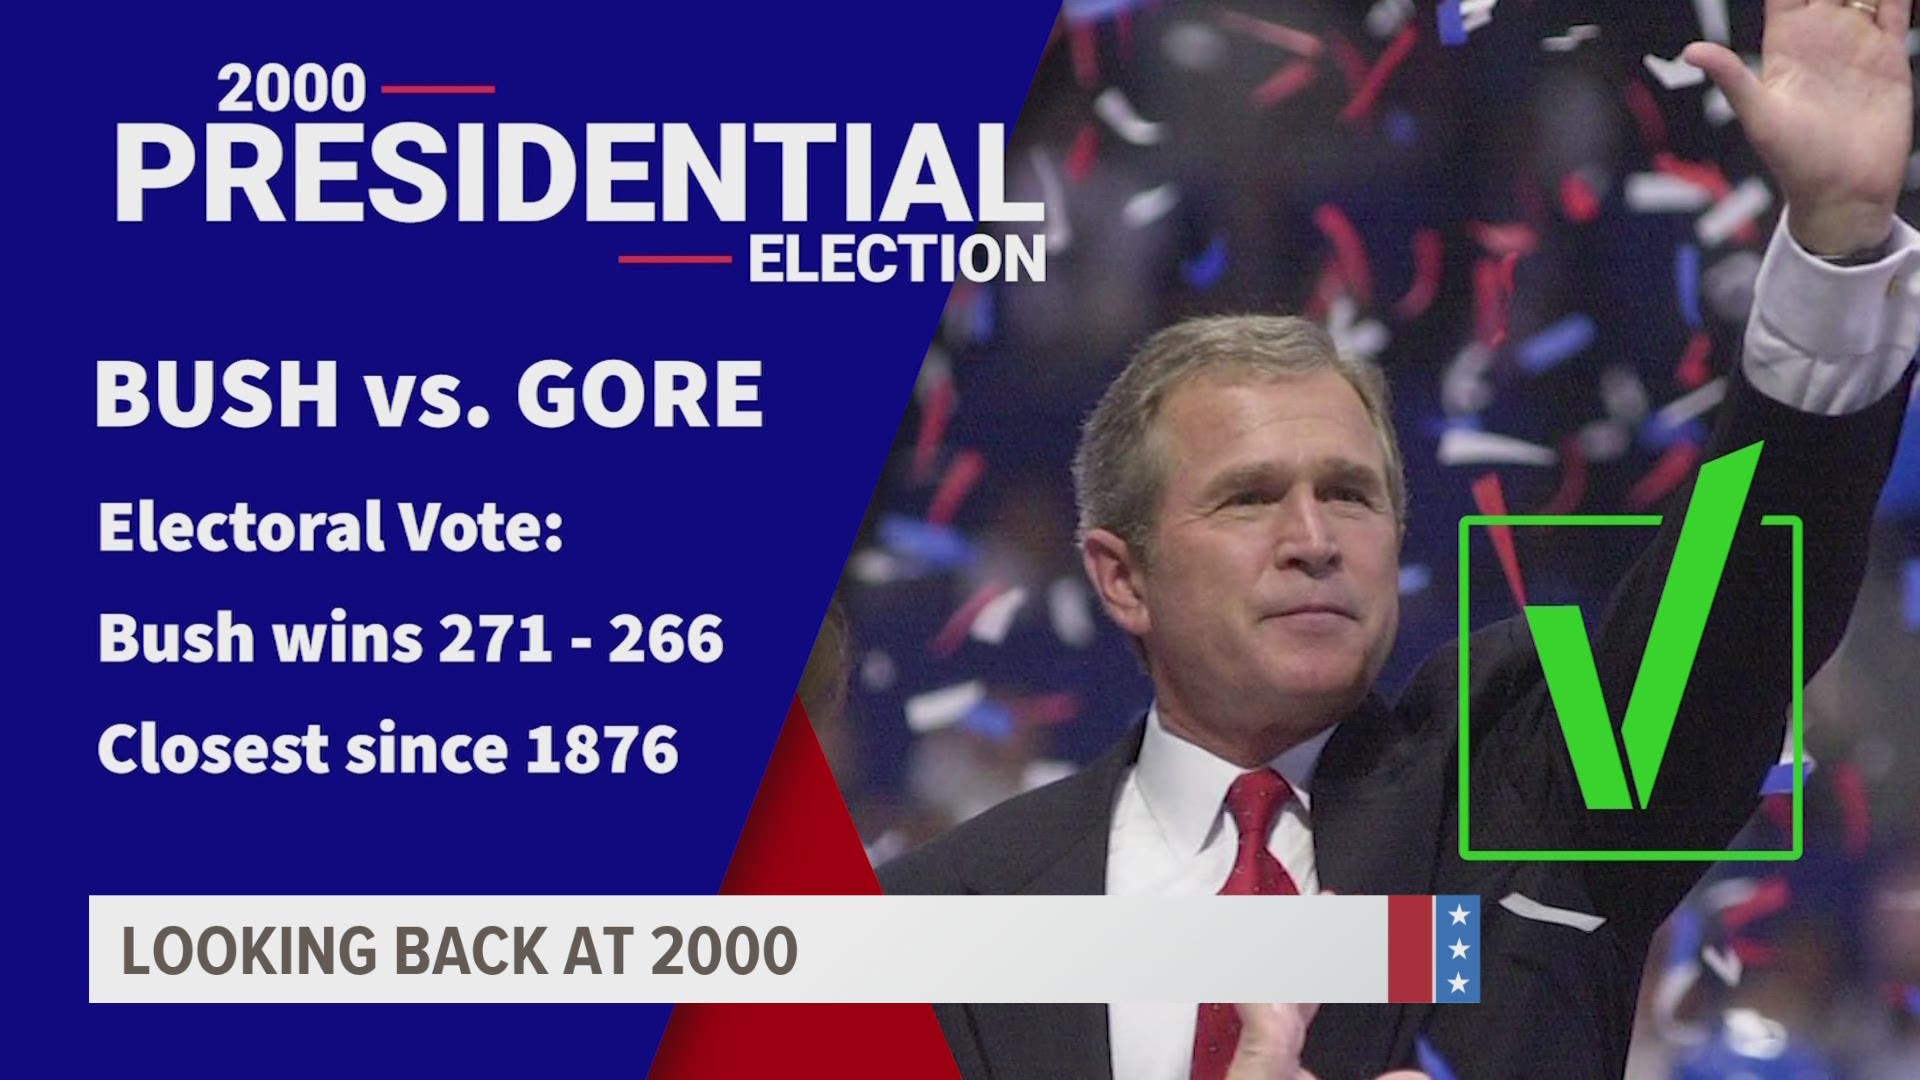 Then-Vice President Al Gore's 266 electoral votes is still the highest for a losing nominee.